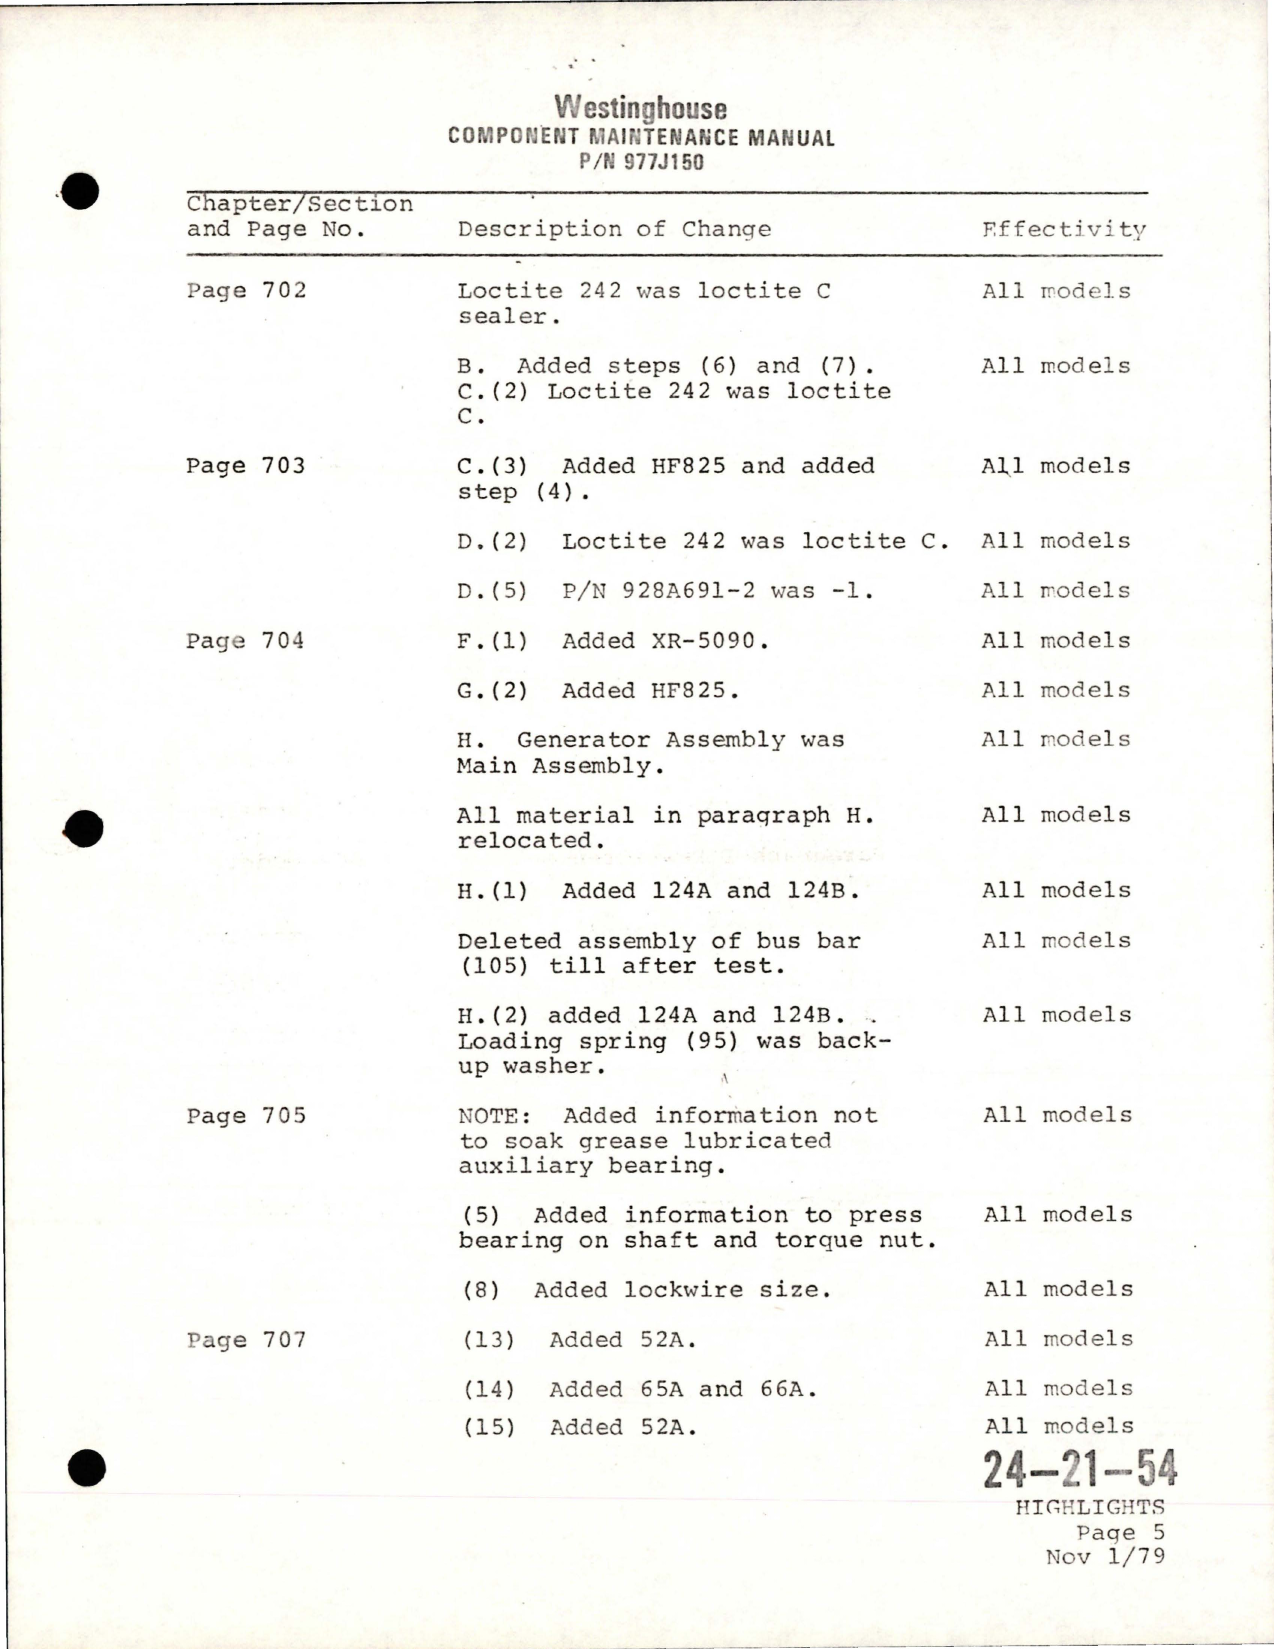 Sample page 7 from AirCorps Library document: Maintenance Manual with Illustrated Parts List for AC Generator - Parts 977J150-1, 977J150-2, 977J150-3, and 977J150-4 